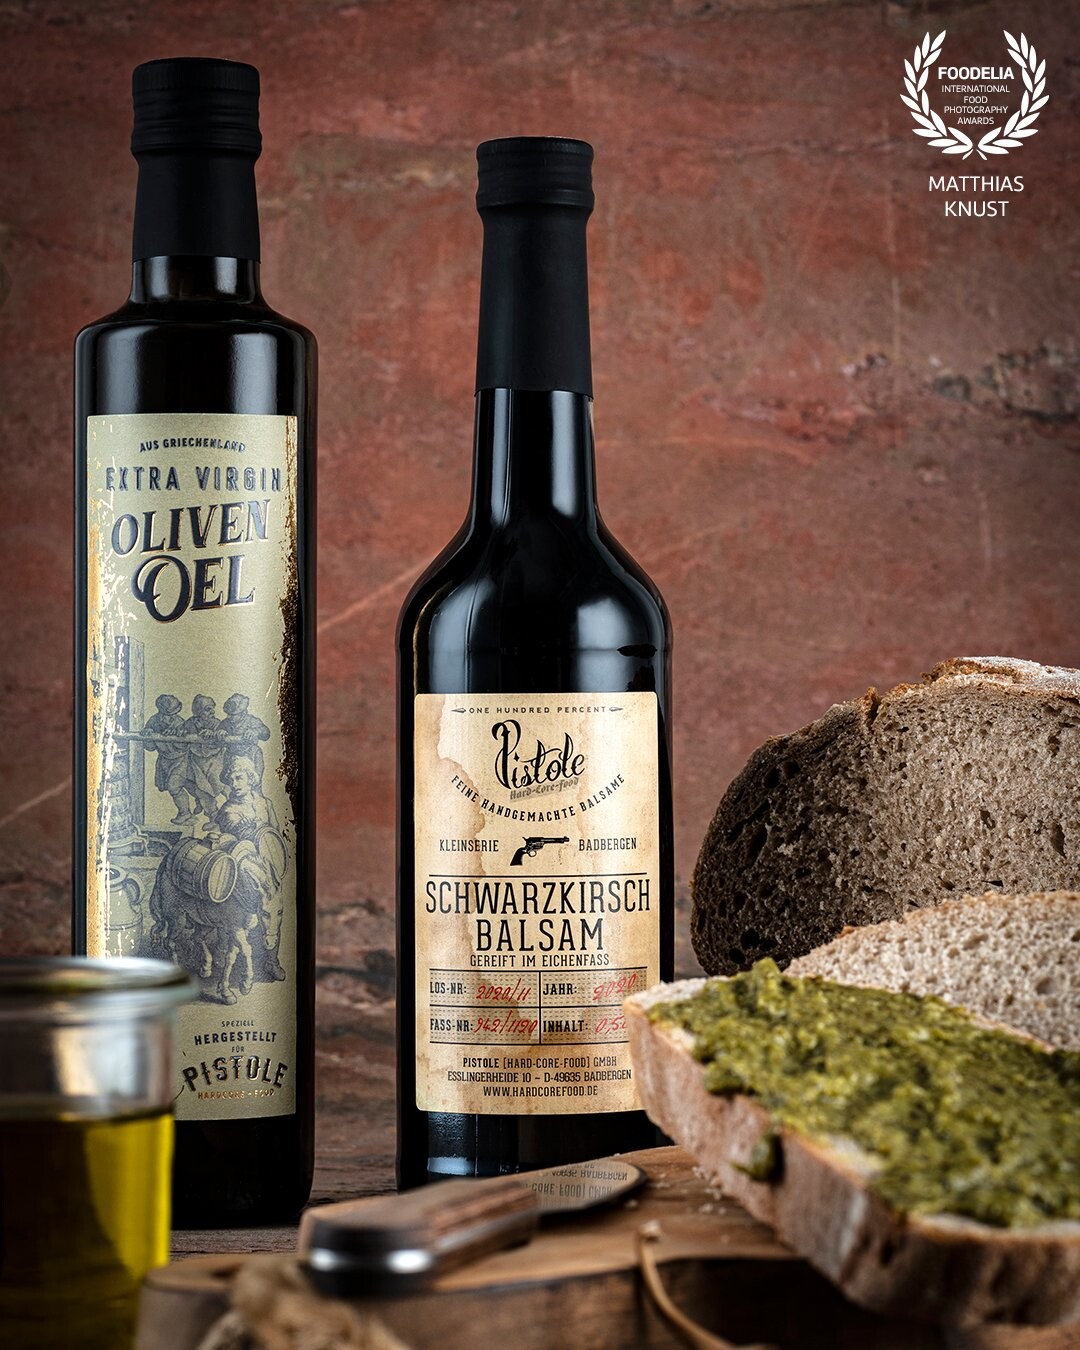 Just olive oil with good bread. A clear, delicious photo set that whets the appetite for more. The food dealer loves straight, honest and straight to the point, high-quality food.